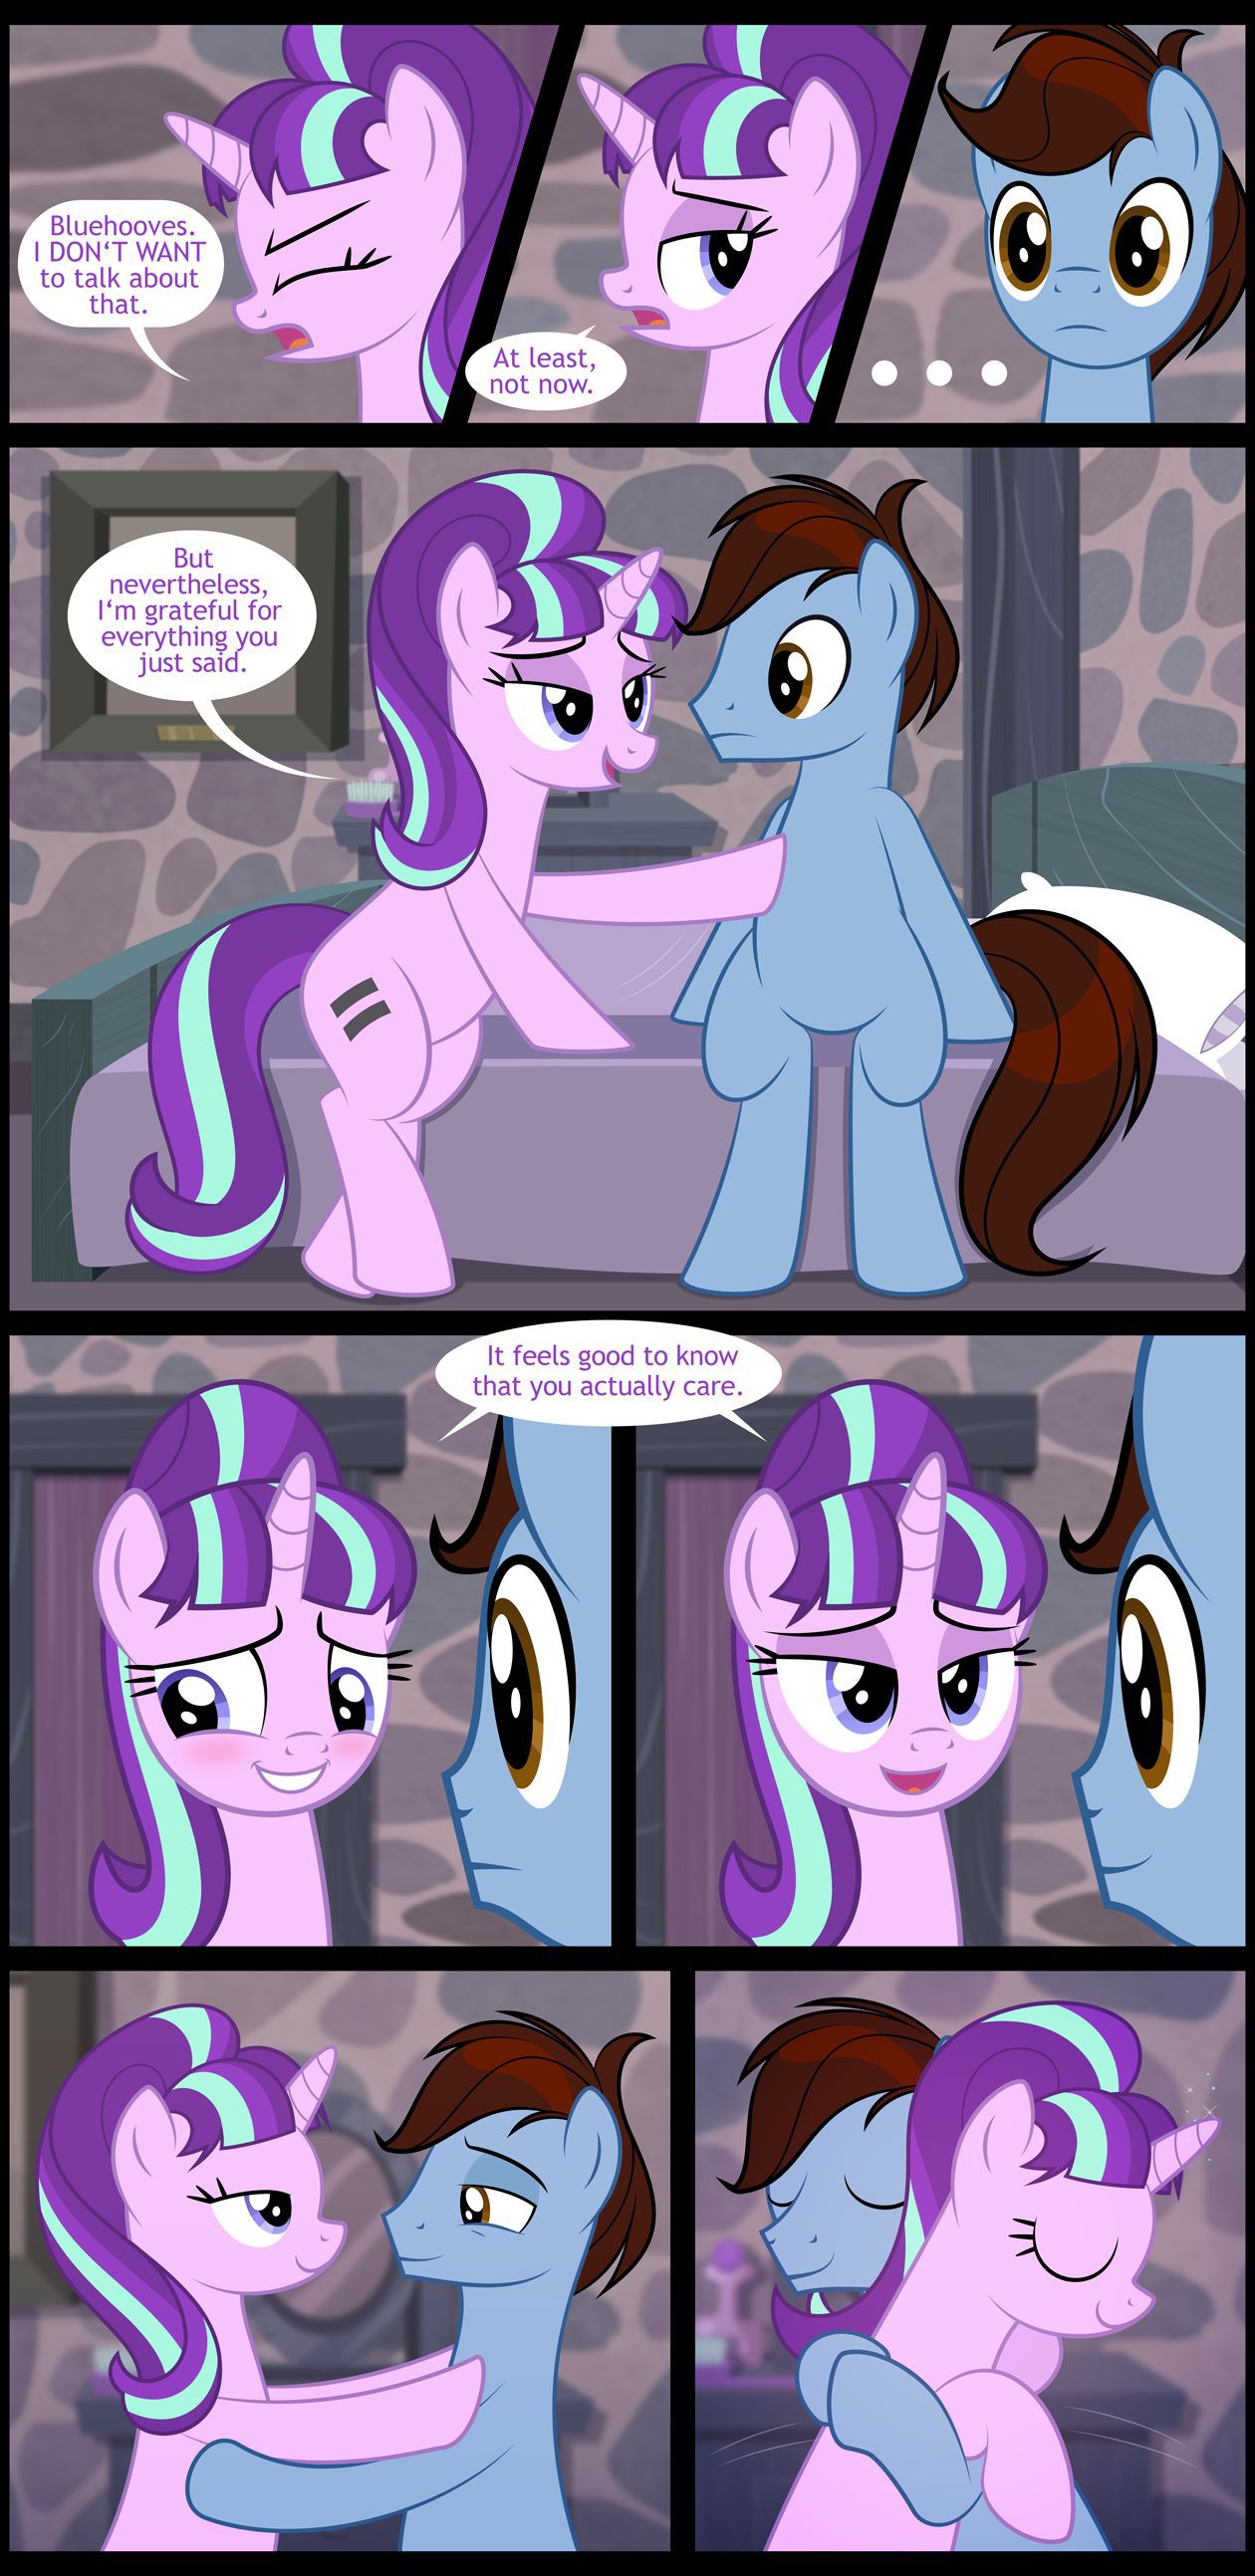 [Culu-Bluebeaver] The Newcomer (My Little Pony: Friendship is Magic) 15